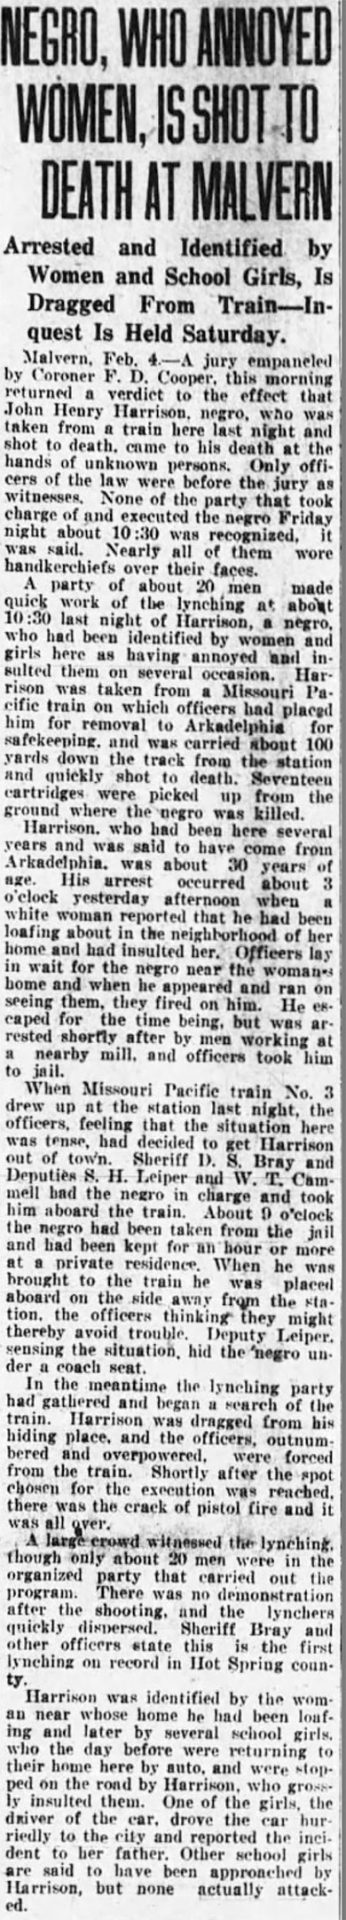 "Negro, Who Annoyed Women, is Shot to Death at Malvern" newspaper clipping